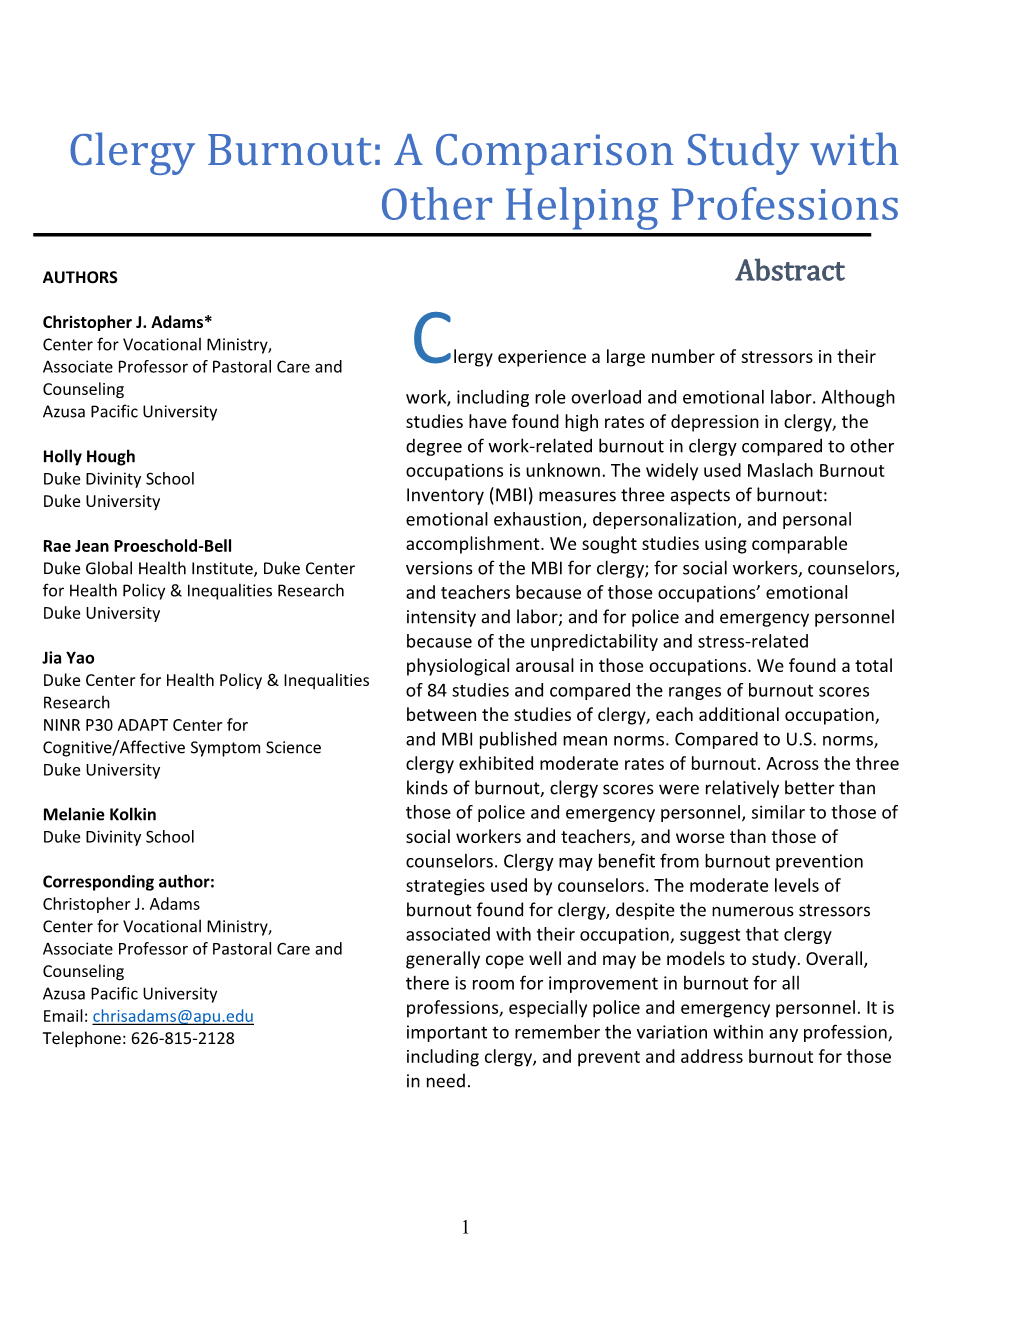 Clergy Burnout: a Comparison Study with Other Helping Professions